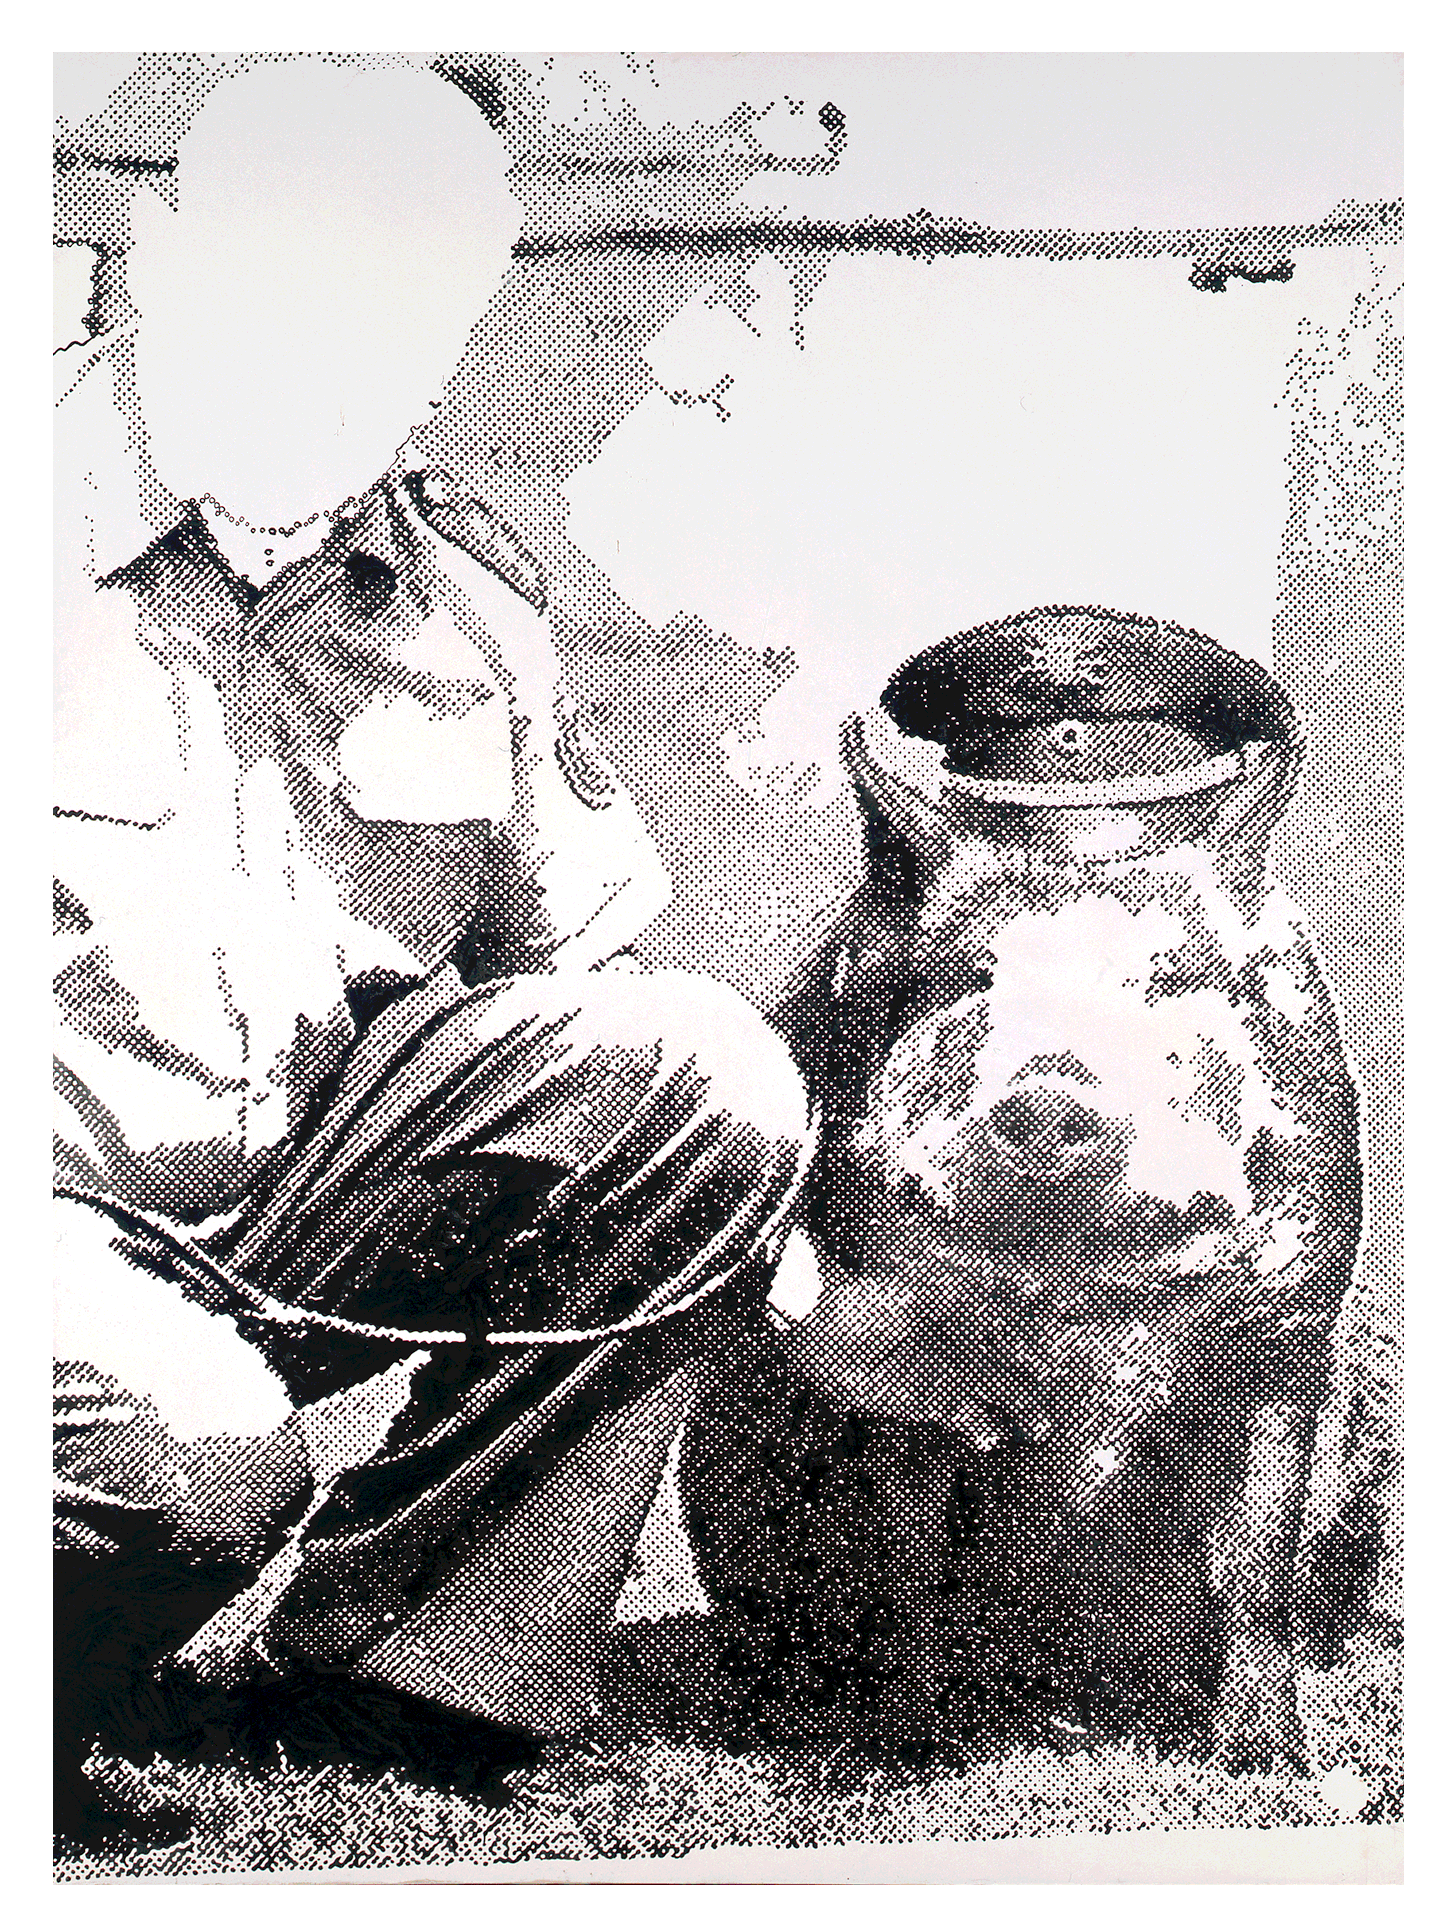 A painting by Sigmar Polke titled Polizeischwein (Police Pig), dated 1986.